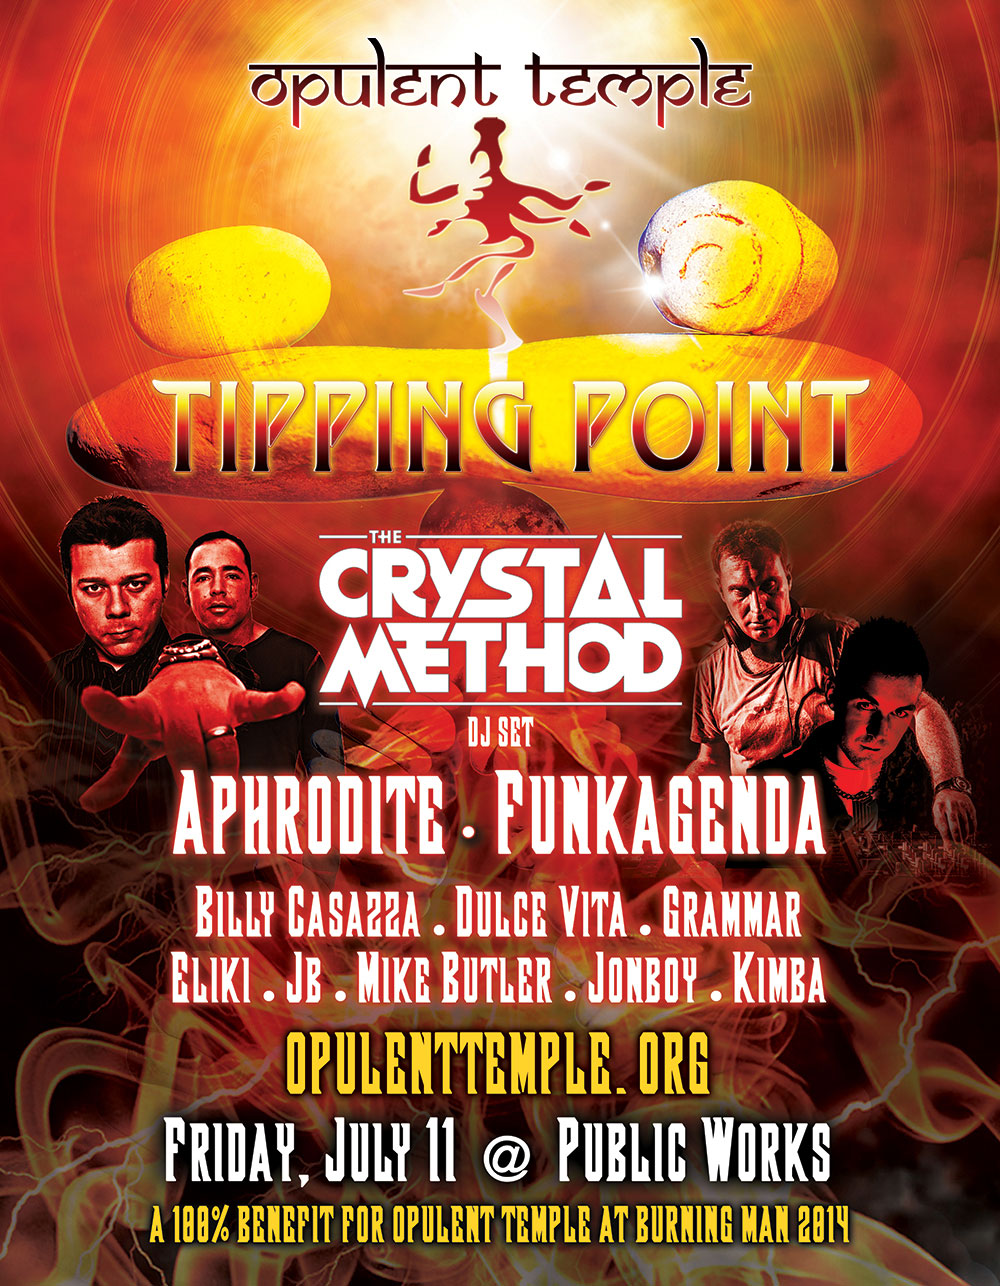 Opulent Temple presents: Tipping Point